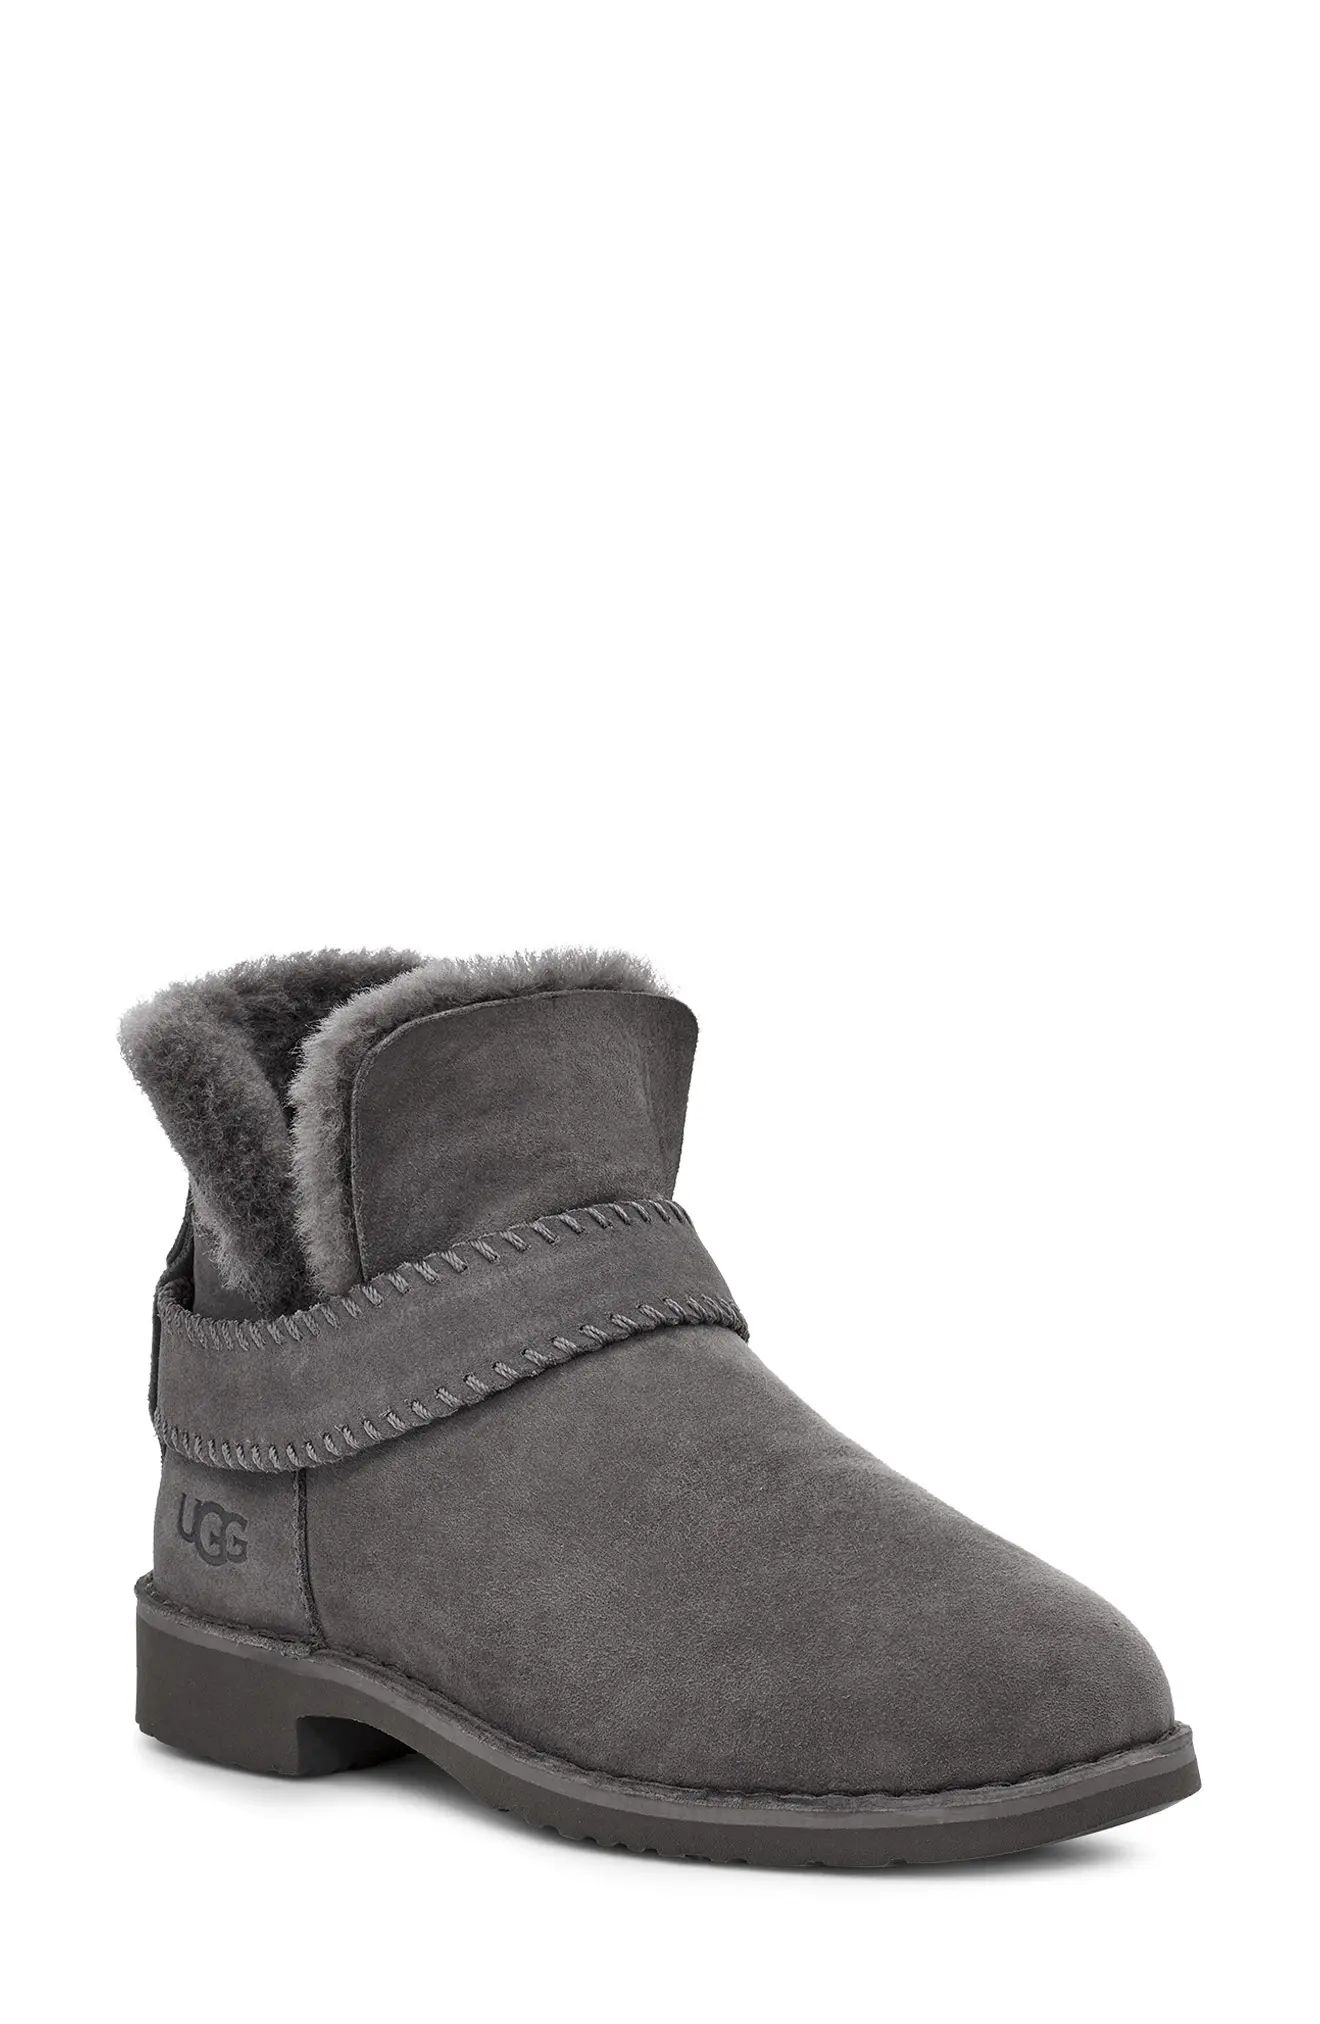 UGG(R) McKay Water Resistant Bootie, Size 6 in Charcoal at Nordstrom | Nordstrom